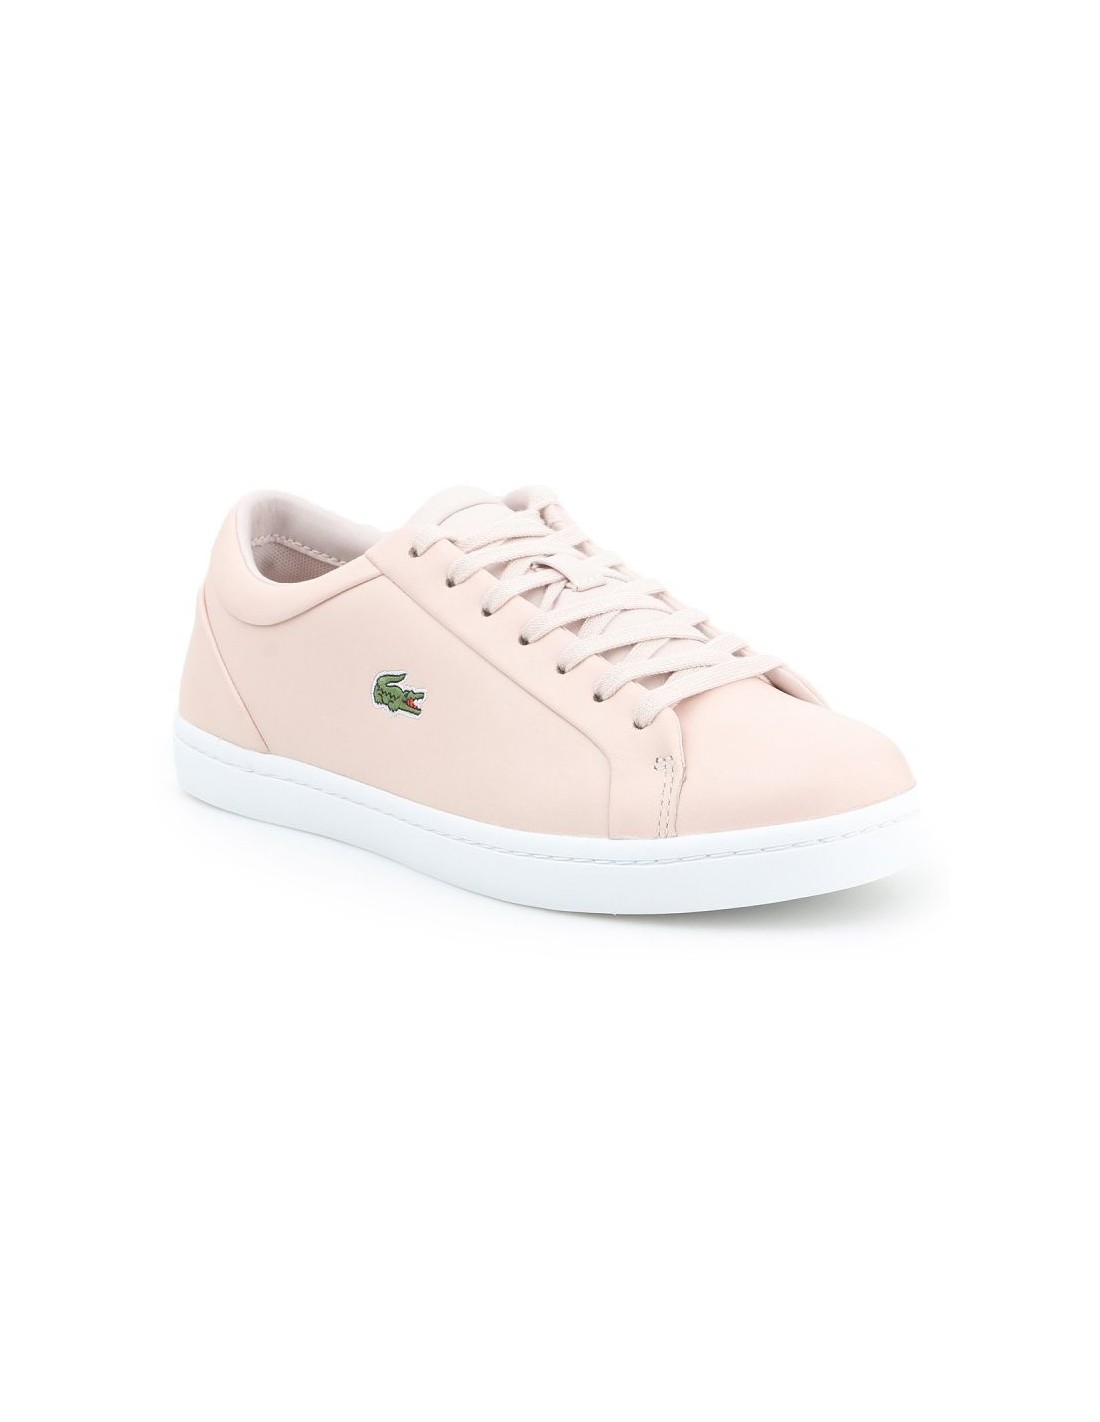 lacoste straightset 317 pink